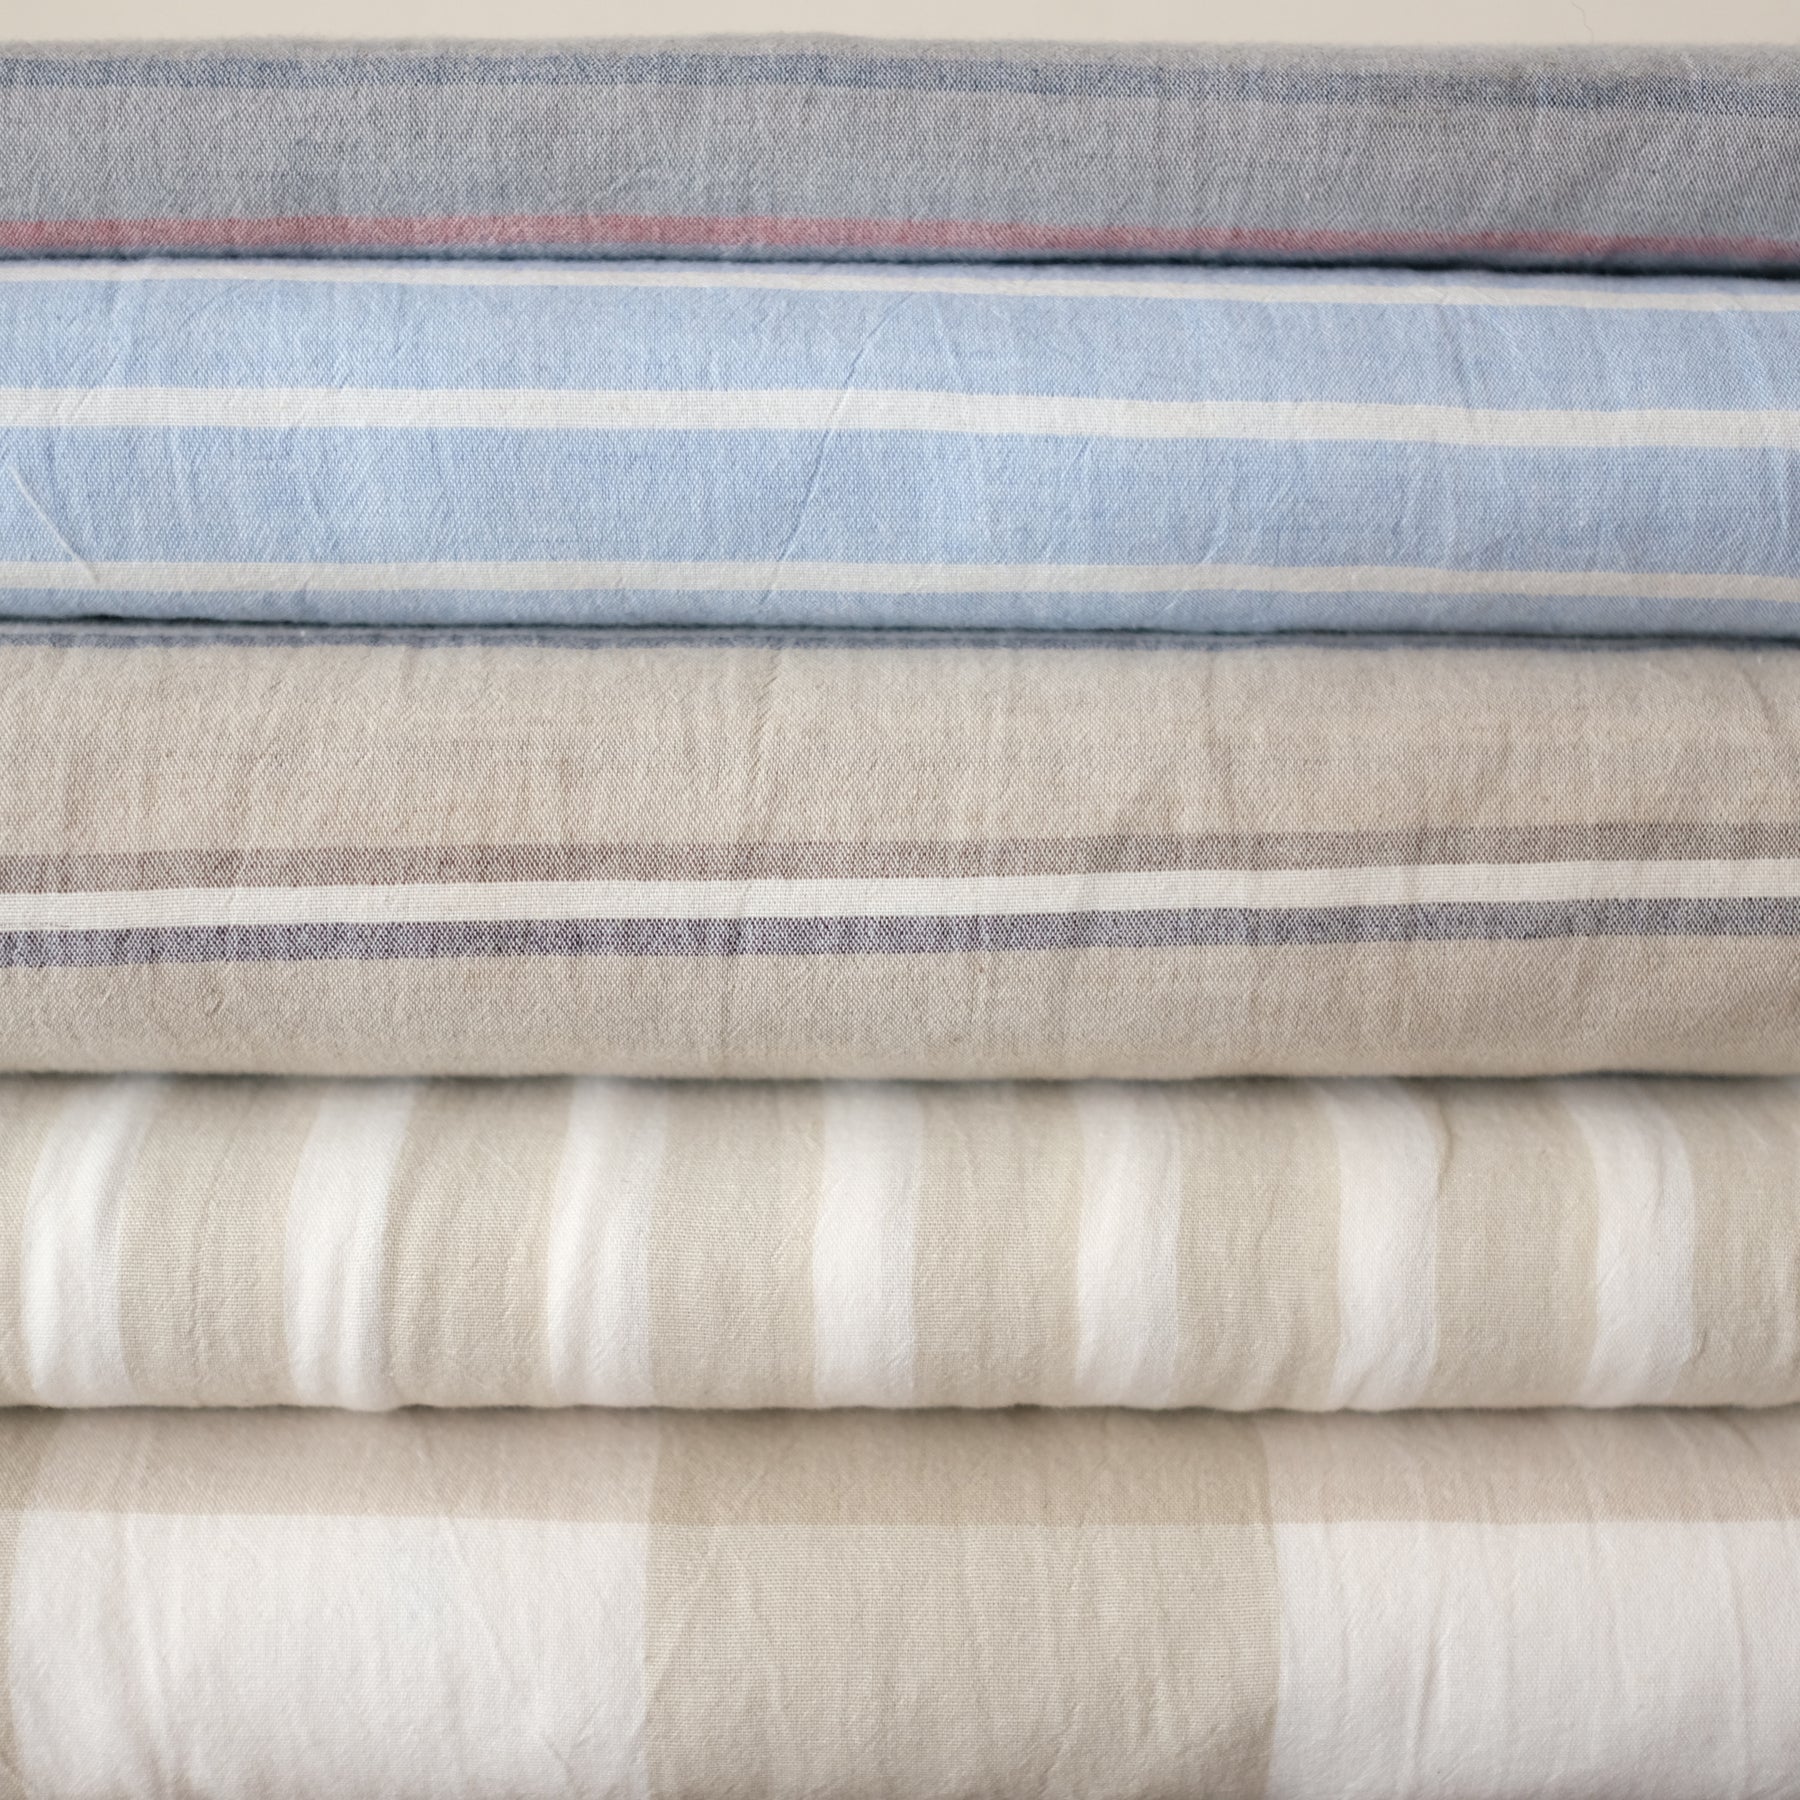 Lightweight Cotton Fabric - Made in Japan